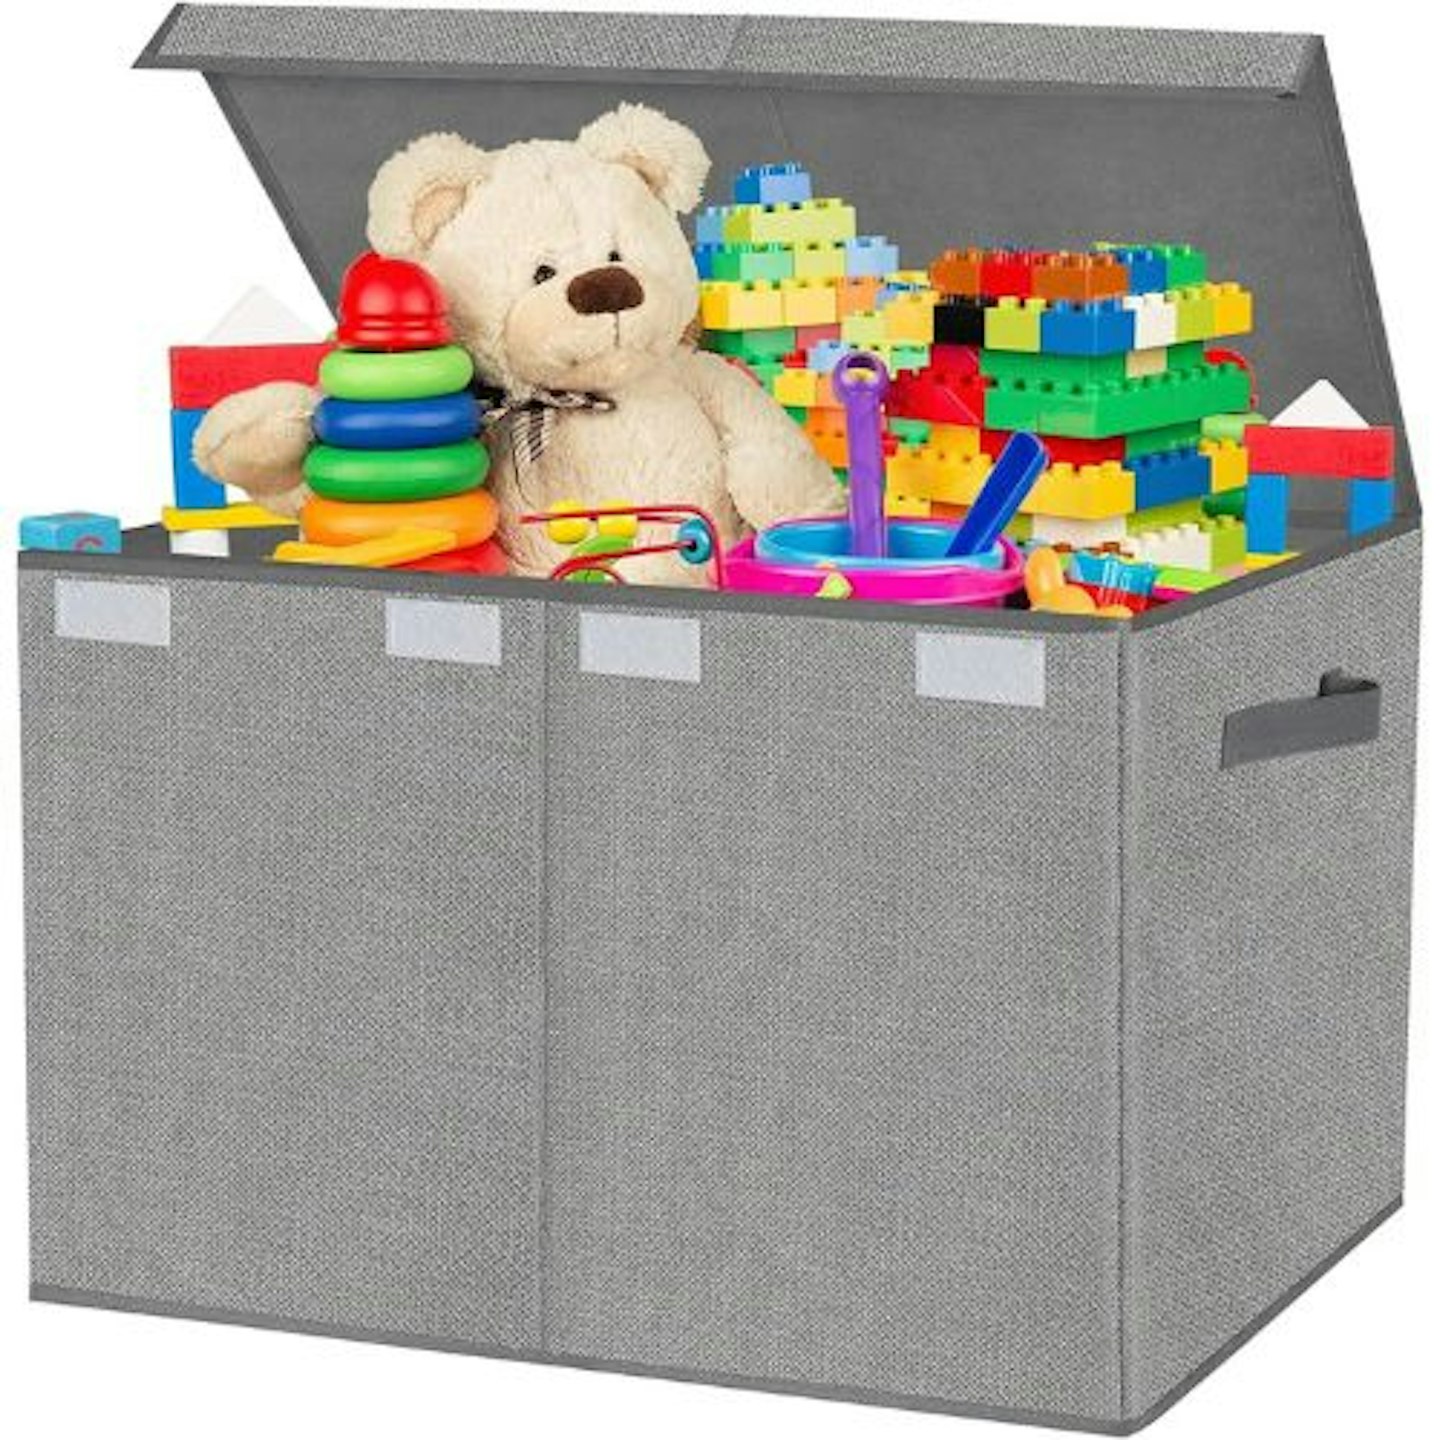 Best toy storage and organiser VERONLY Large Toy Box Chest with Lid